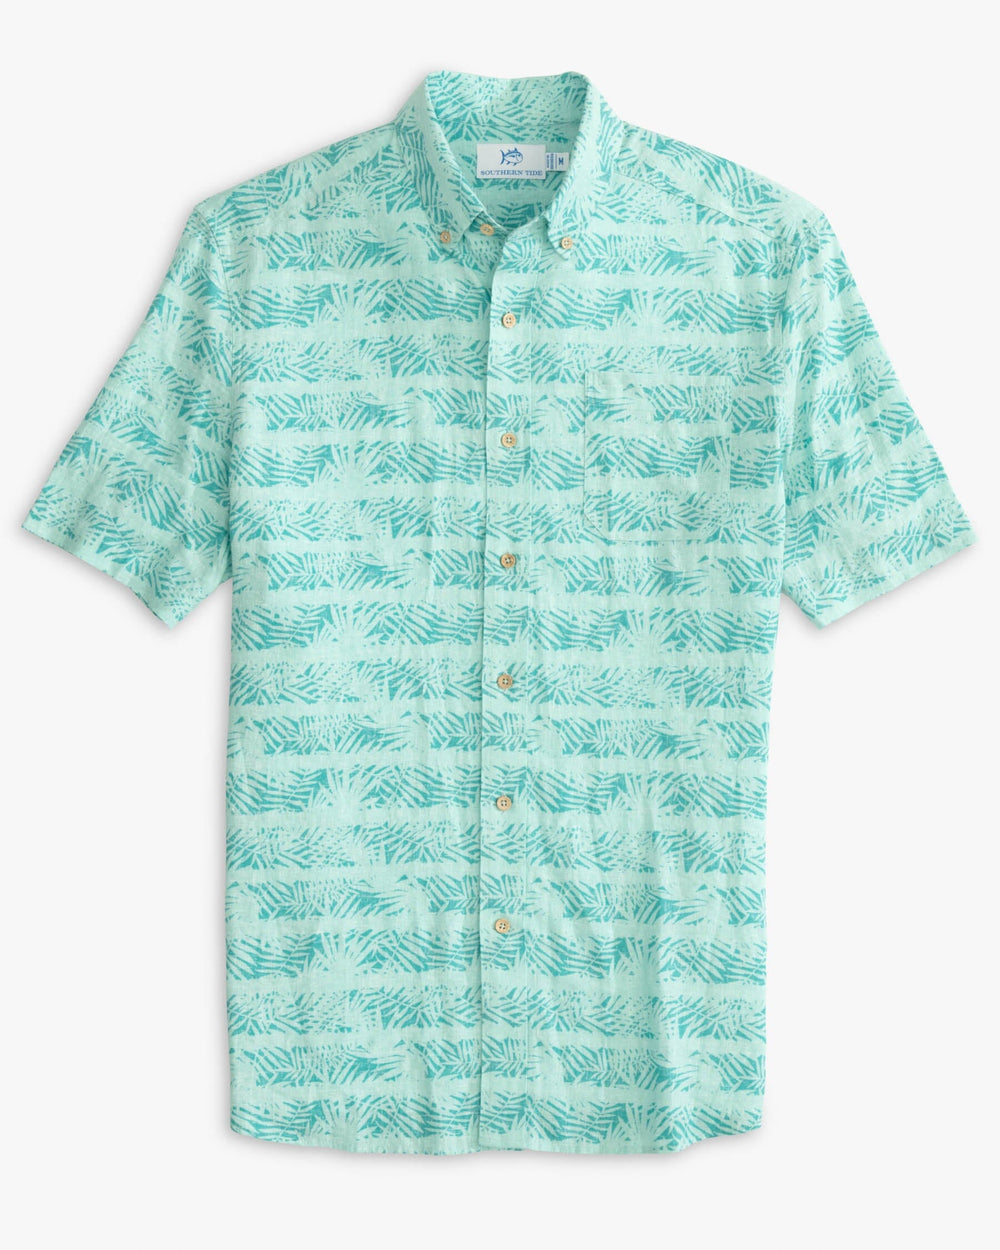 The front view of the Southern Tide Palmy Stripe Short Sleeve Button Down Shirt by Southern Tide - Tidal Wave